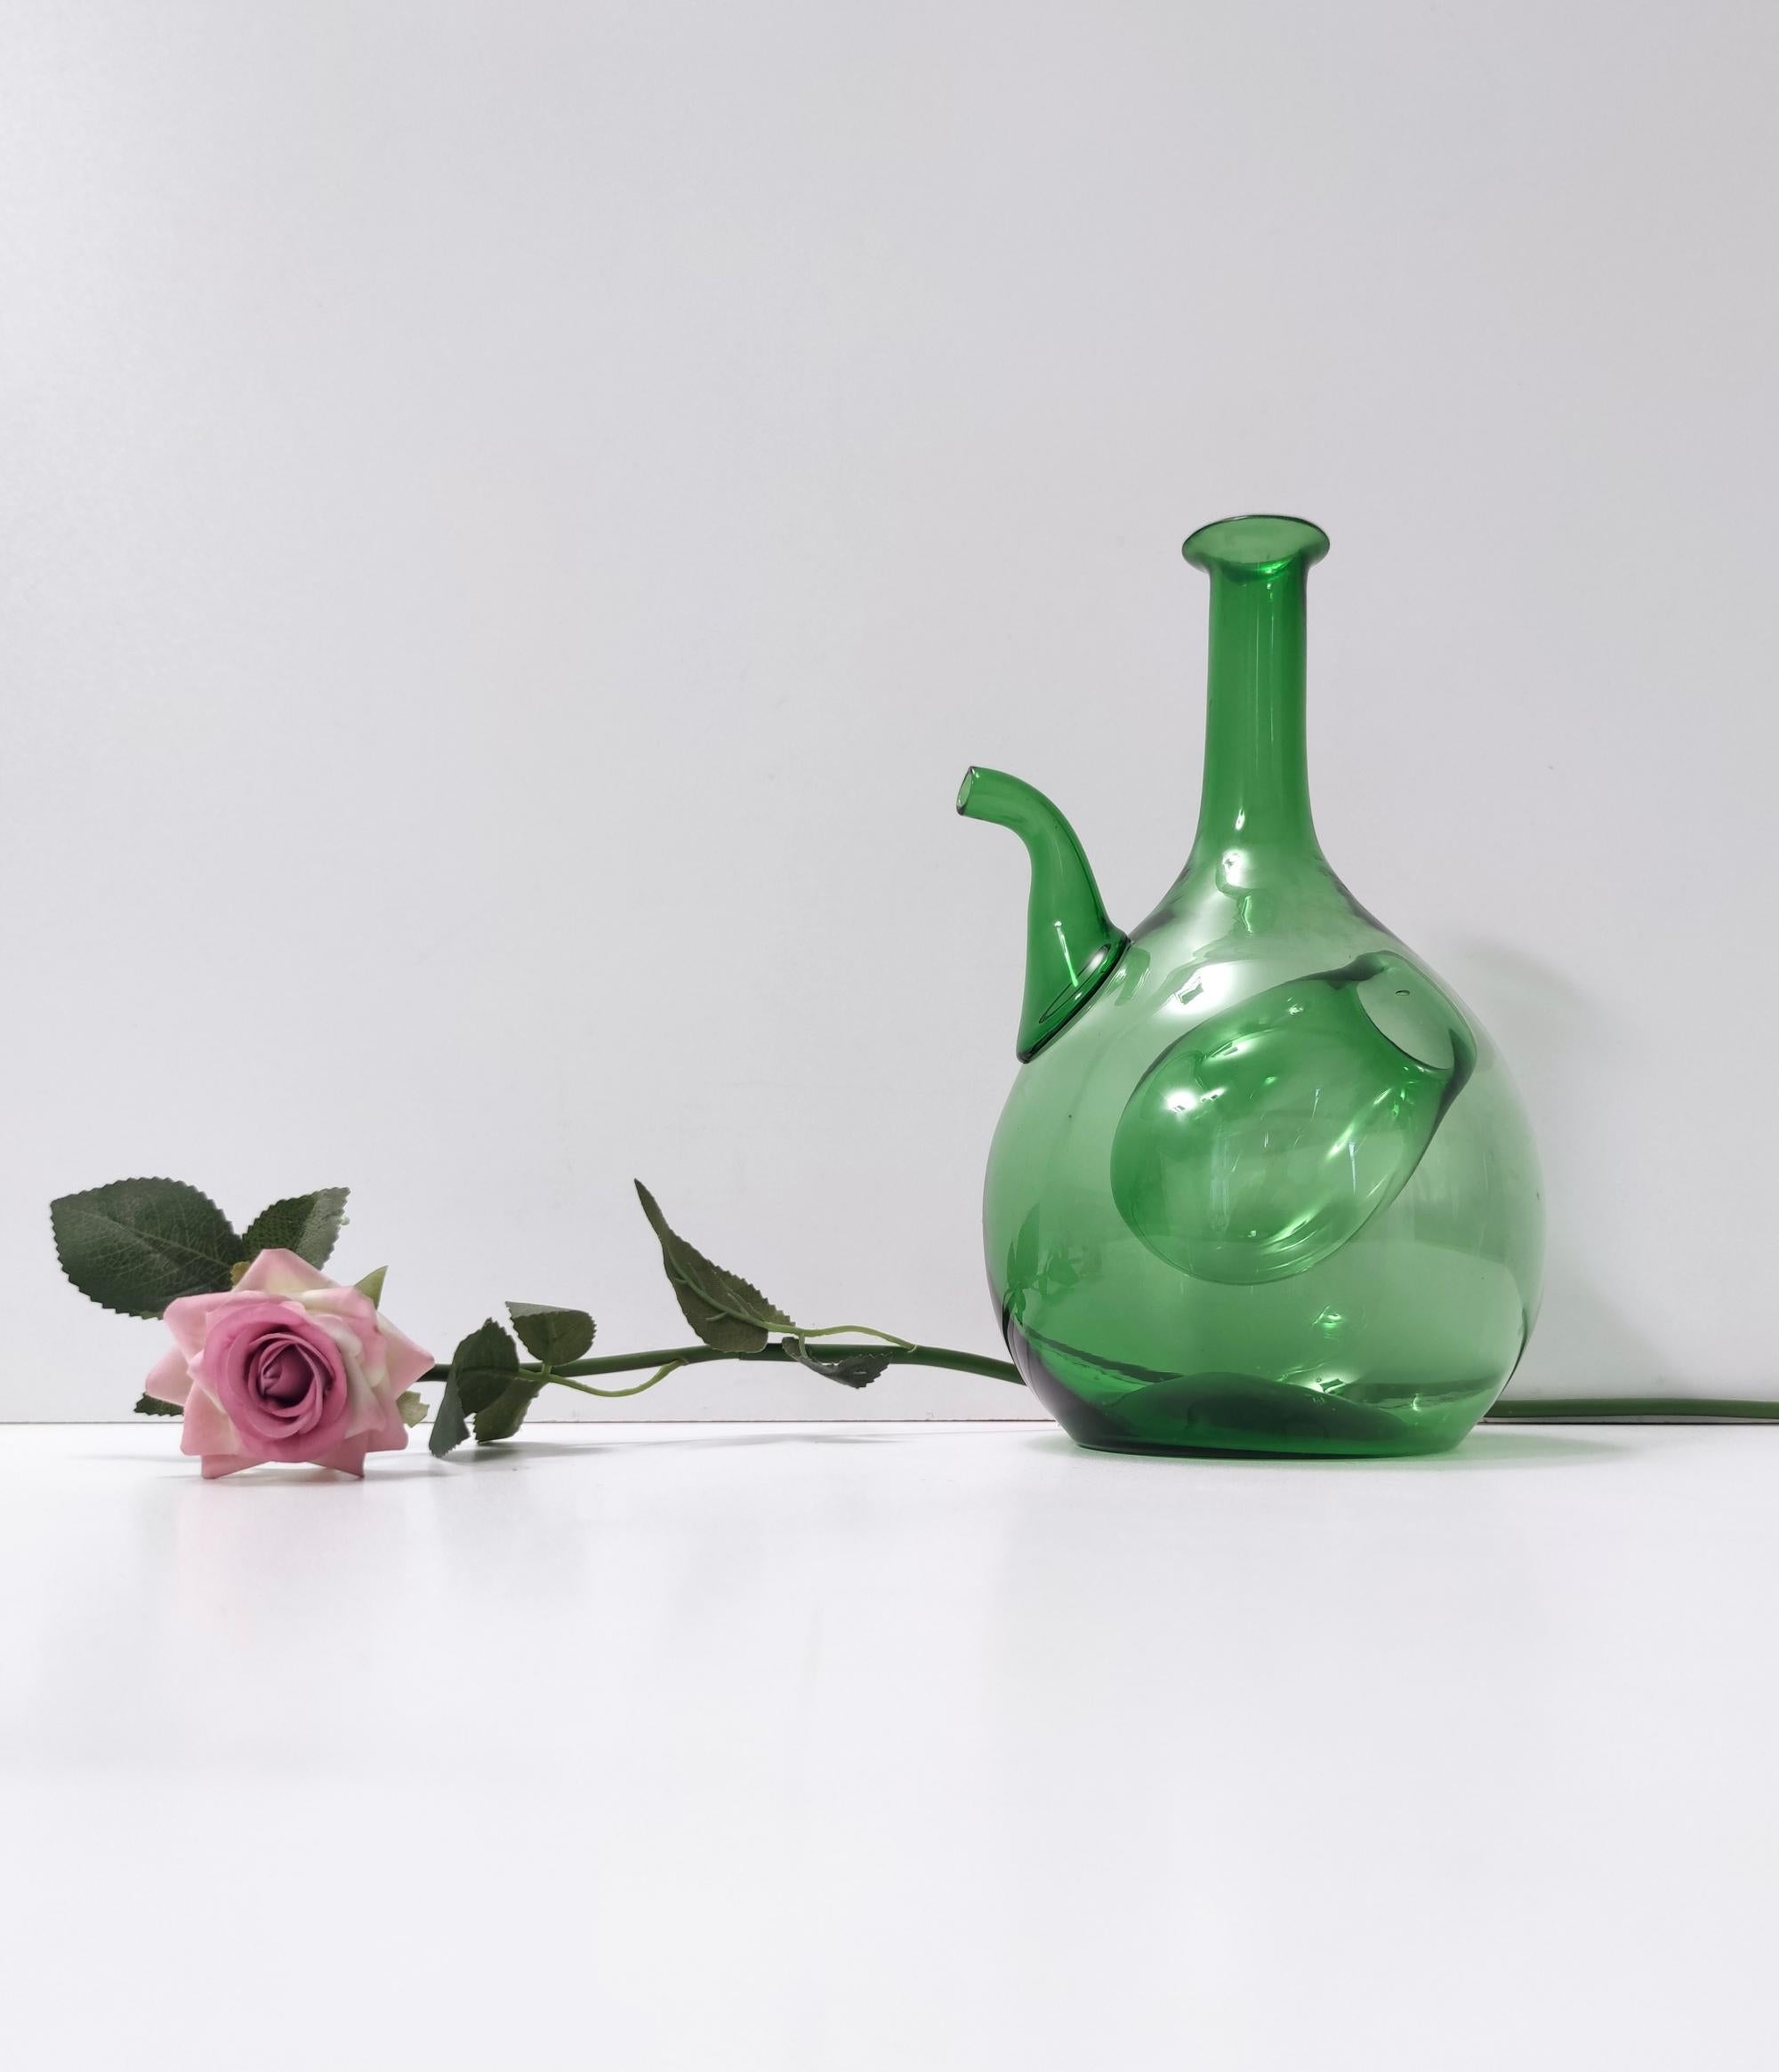 Made in Empoli, Italy, 1940s - 1950s.
This stunning jug is made in green blown glass and features an internal 